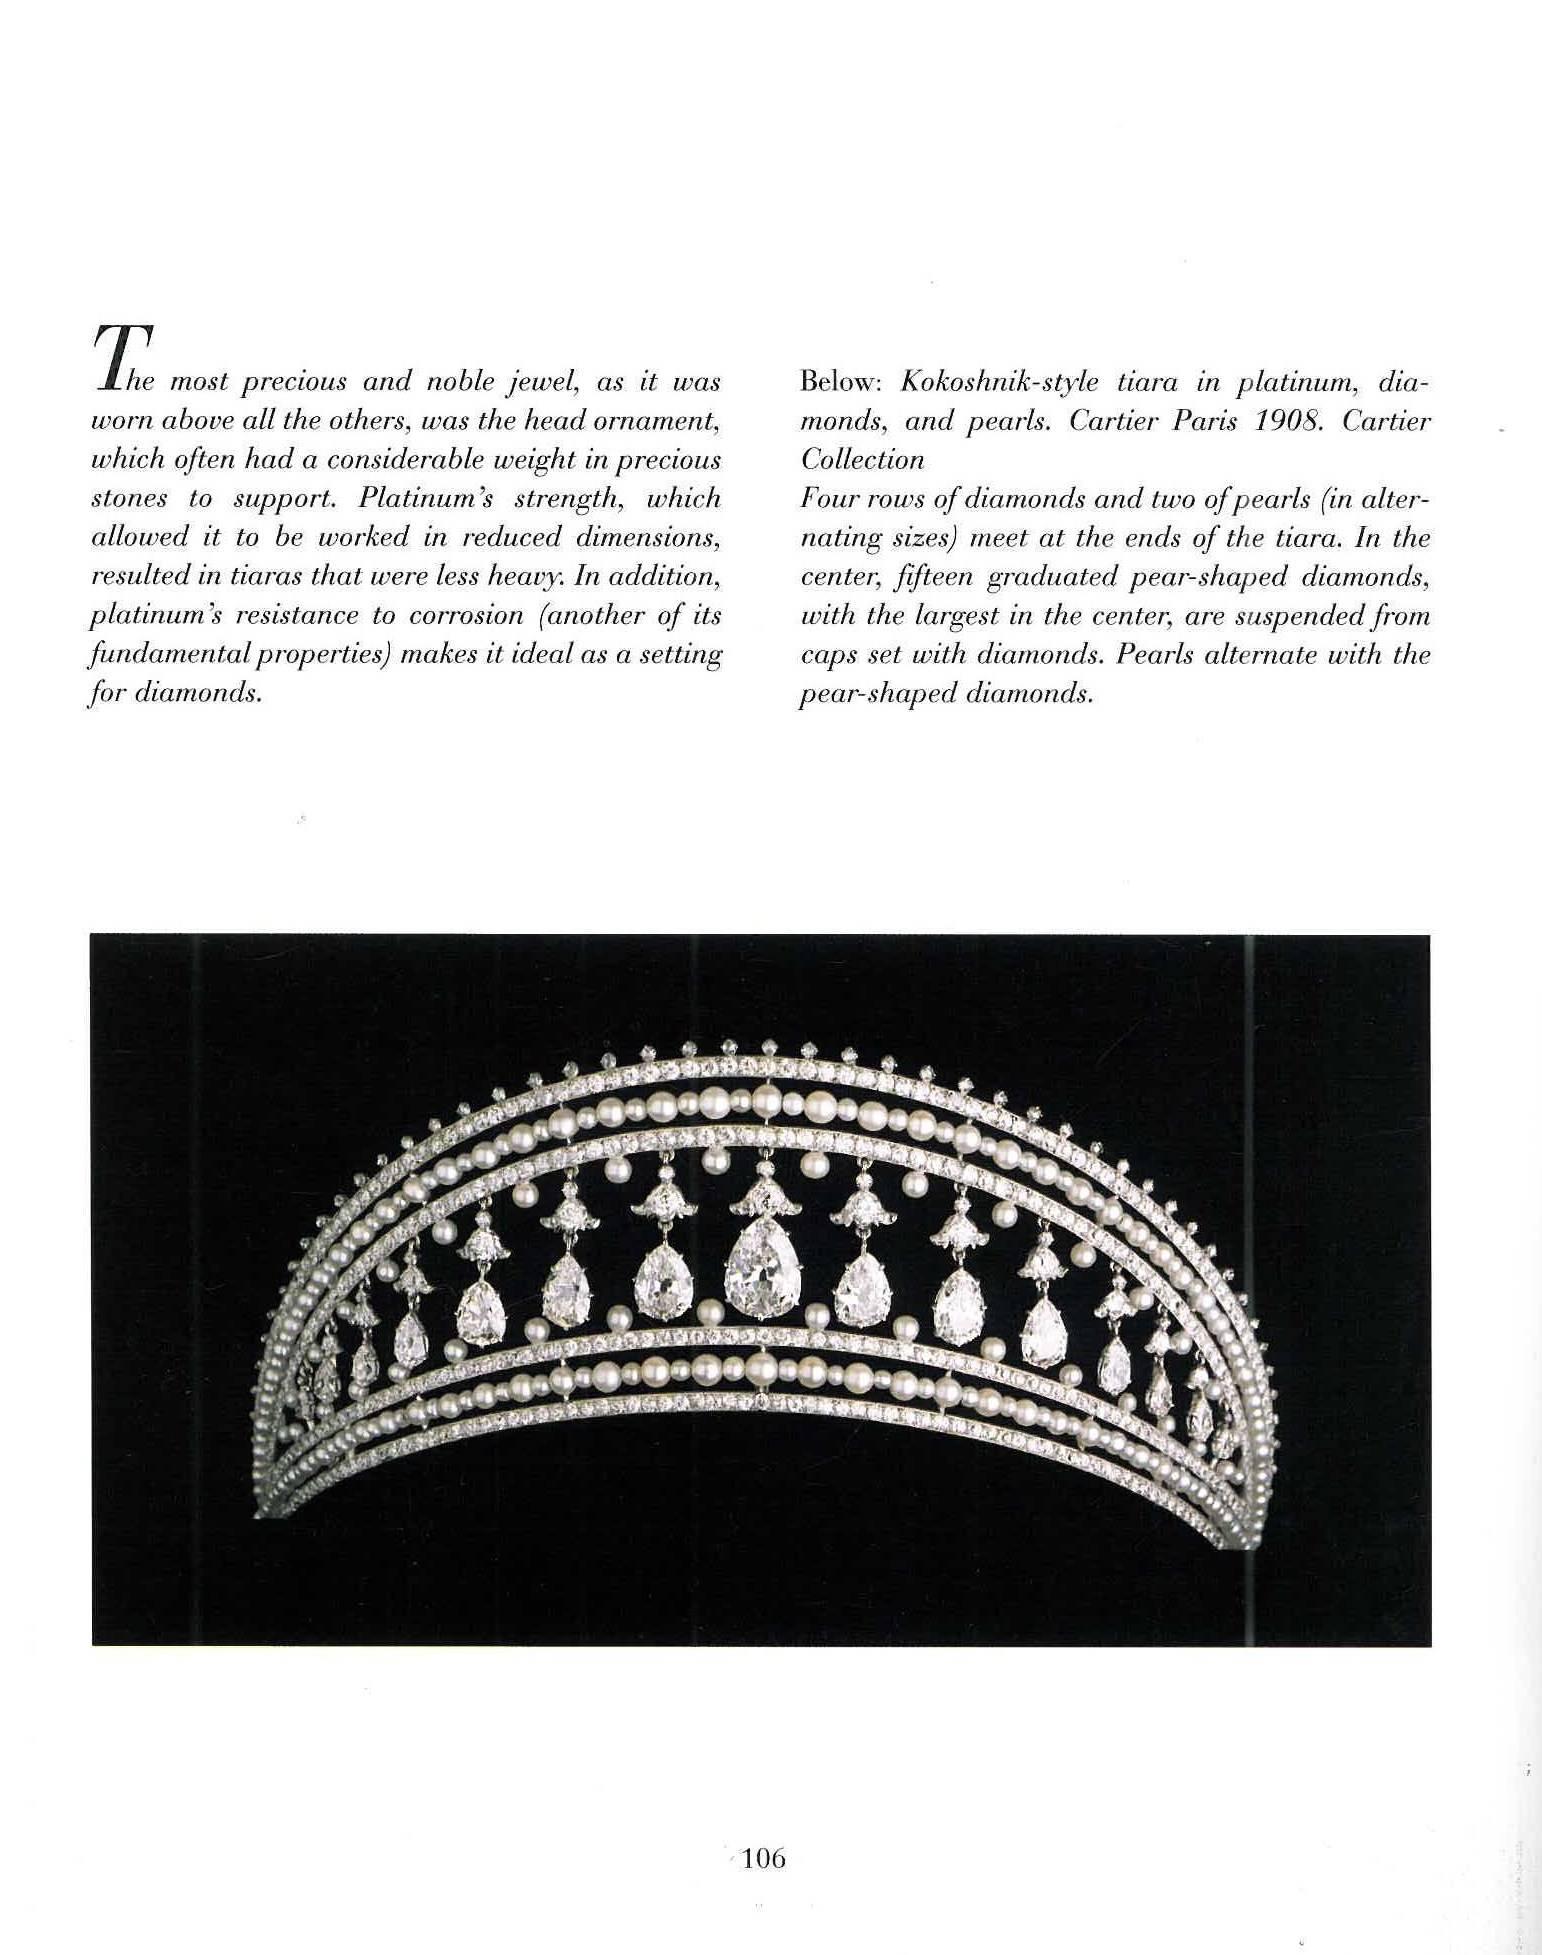 This beautifully photographed and illustrated book is the first survey of Cartier's work in platinum. Platinum is known for its incomparable allure and the way it enhances diamonds, the book presents hundreds of sumptuous jewels among which there